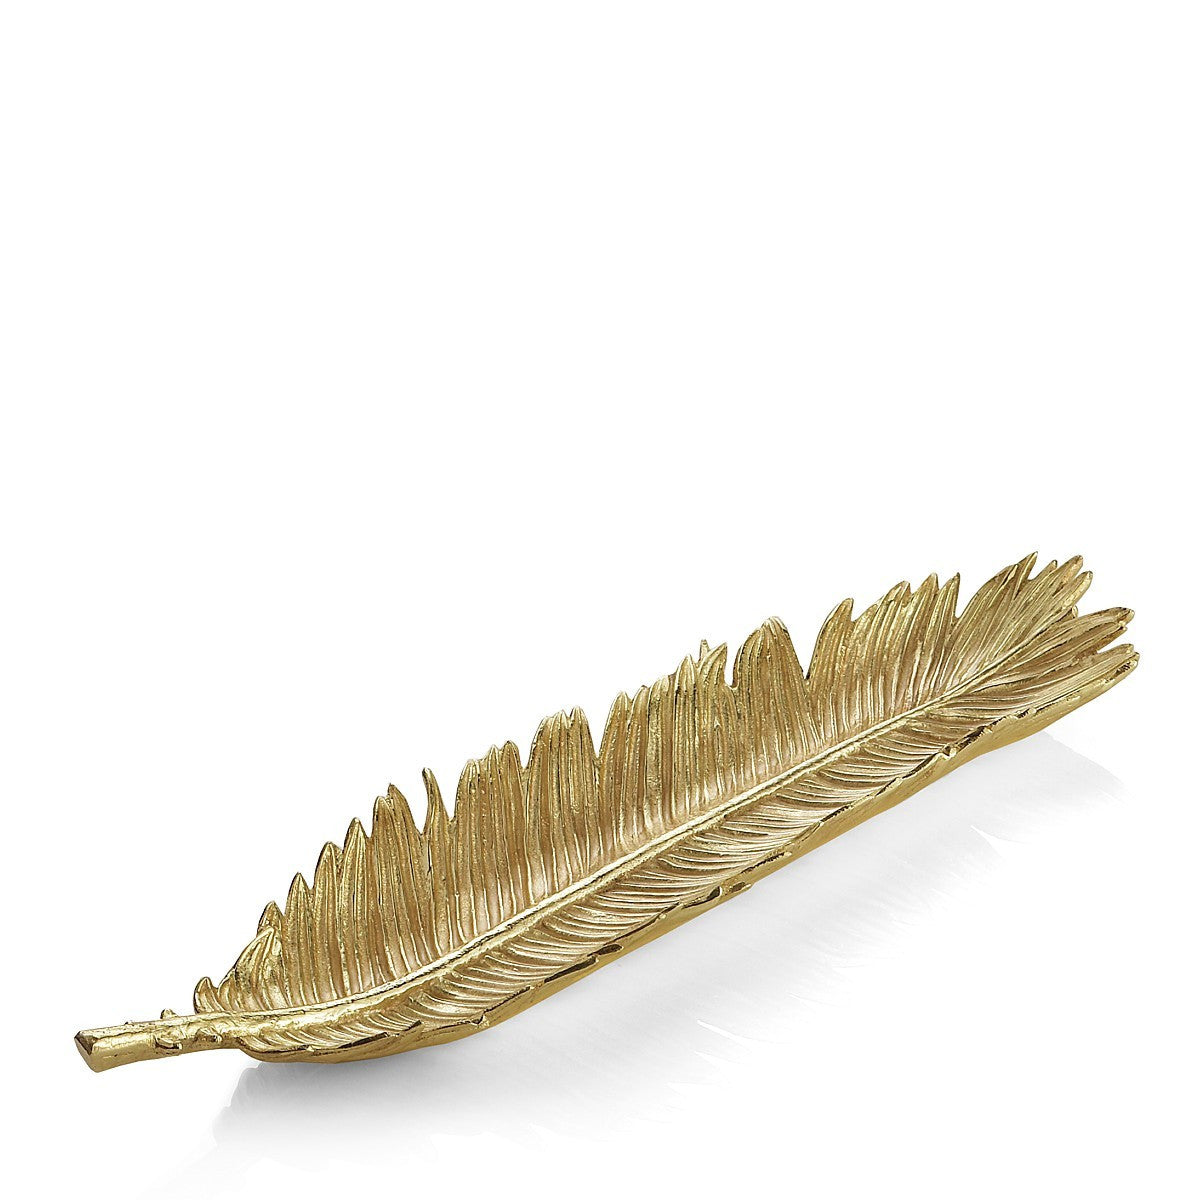 New Leaves Sago Palm Bread Plate - RSVP Style